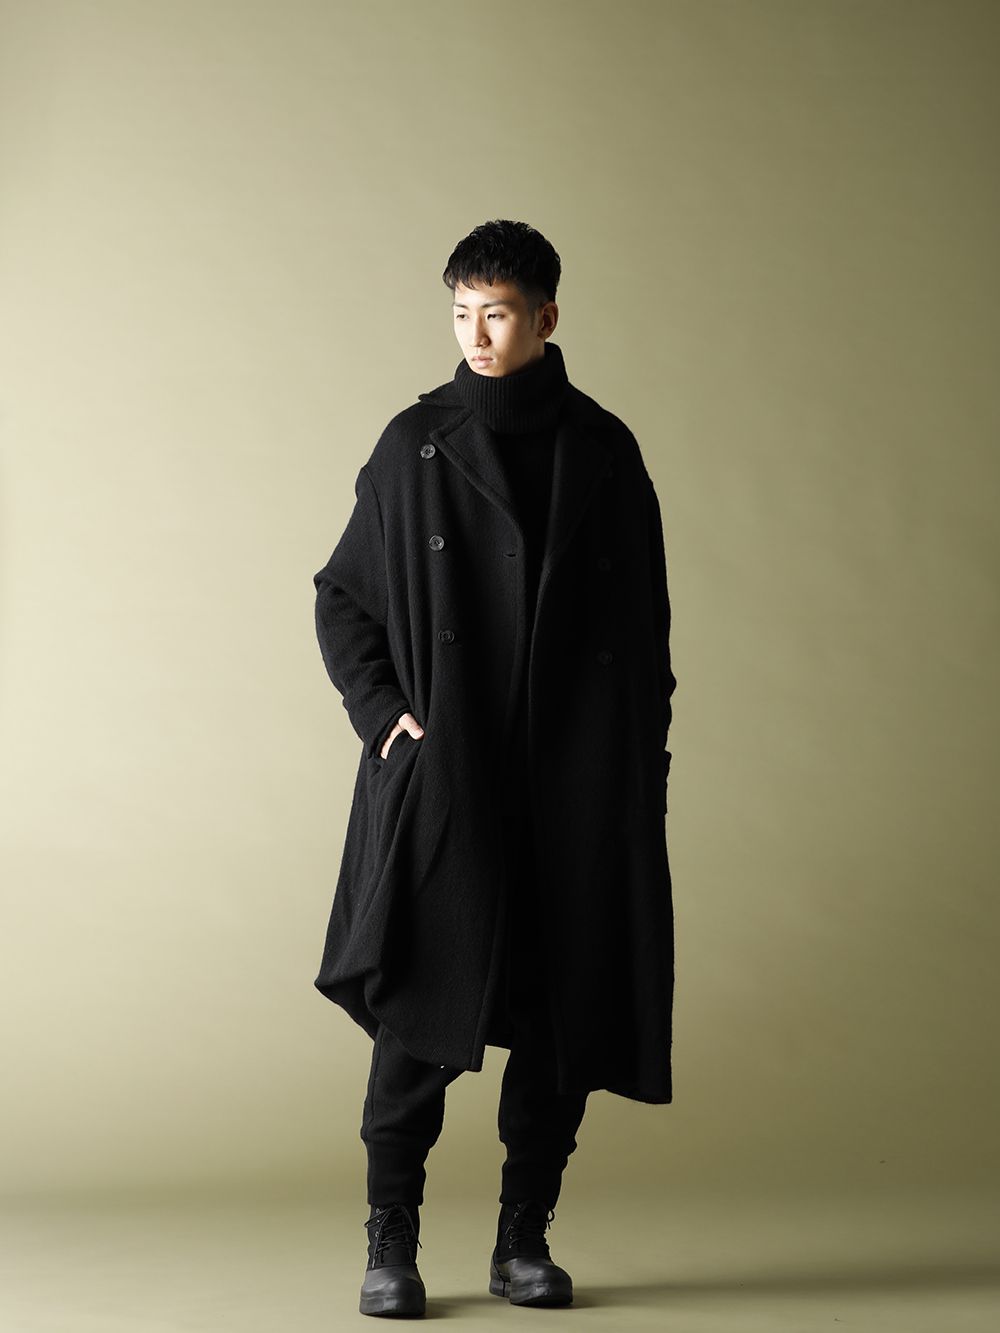 LOGY Kyoto JULIUS 20-21AW DOUBLE BREASTED COAT STYLE!! - FASCINATE